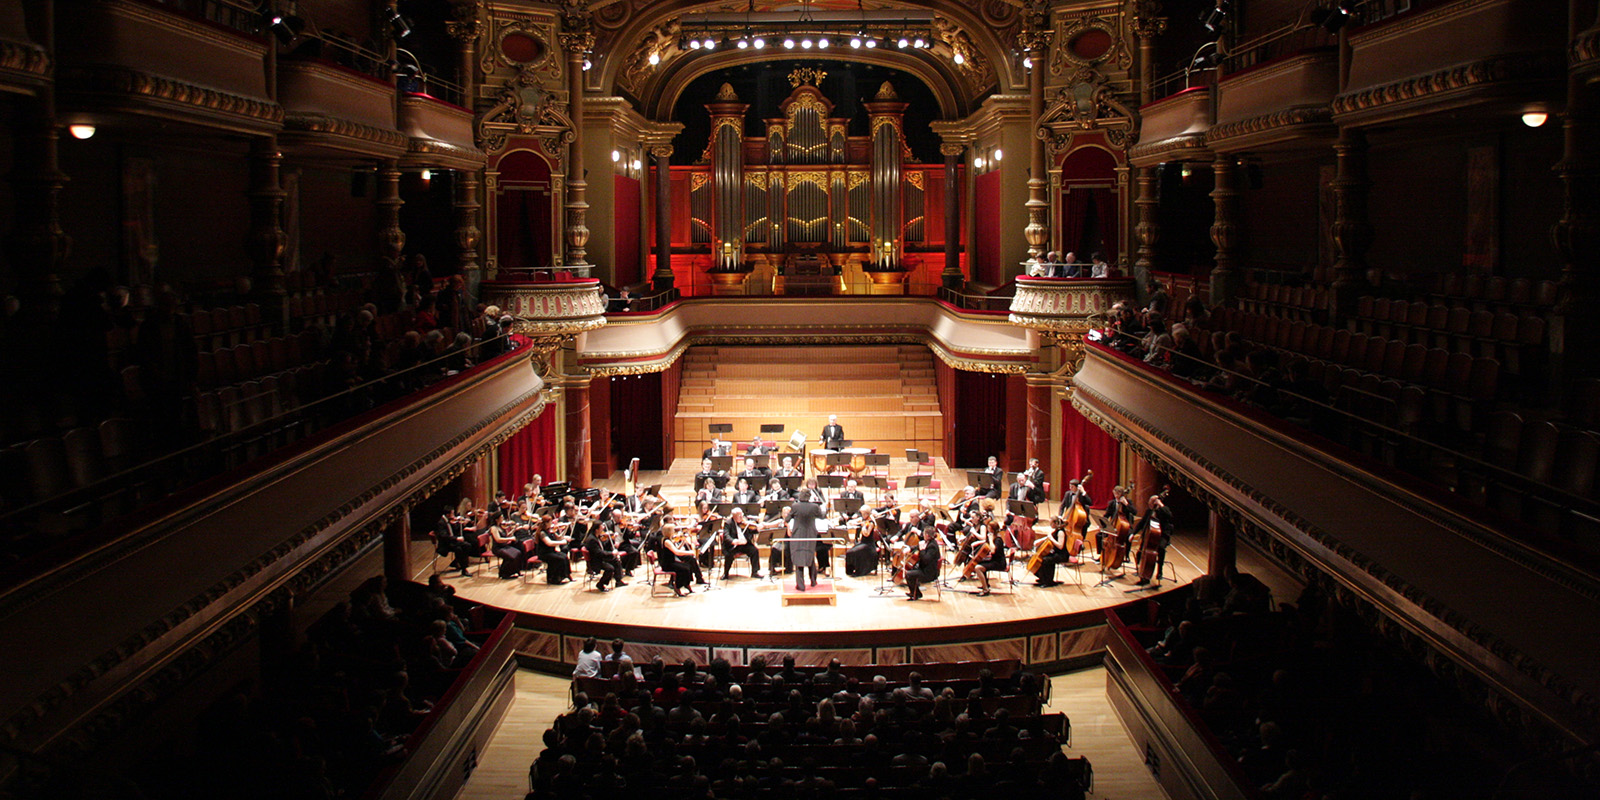 An orchestra performs on stage in an ornate concert hall